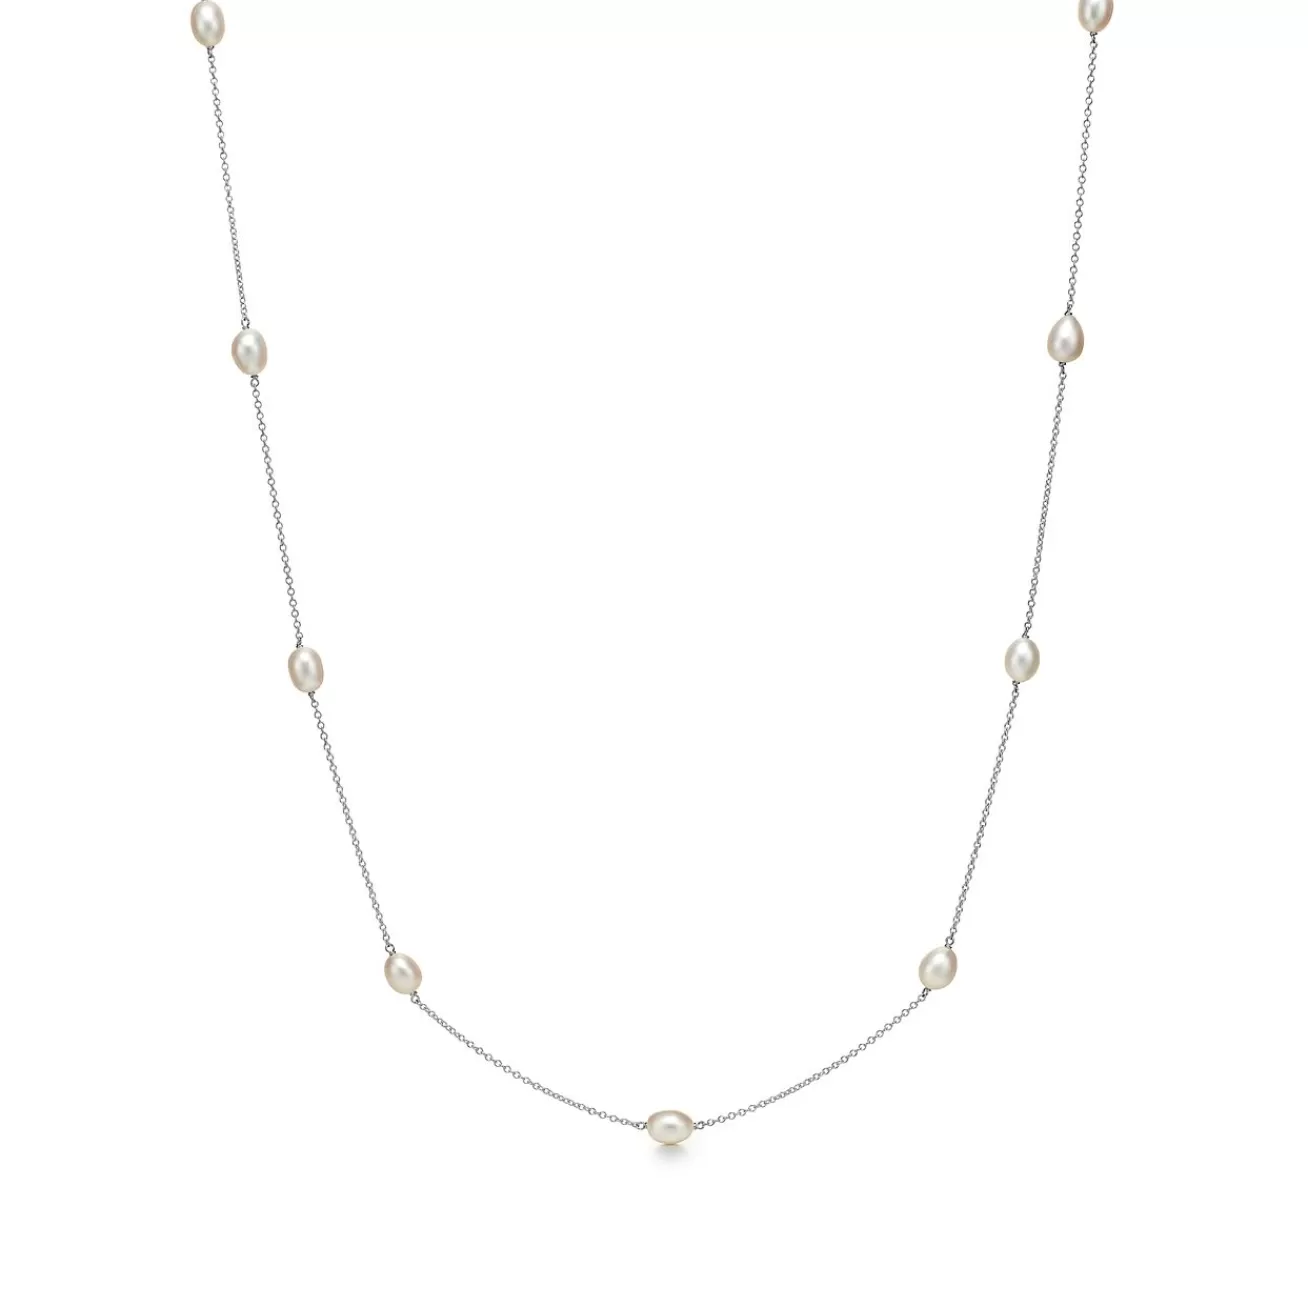 Tiffany & Co. Elsa Peretti® Pearls by the Yard™ necklace in sterling silver. | ^ Necklaces & Pendants | Sterling Silver Jewelry